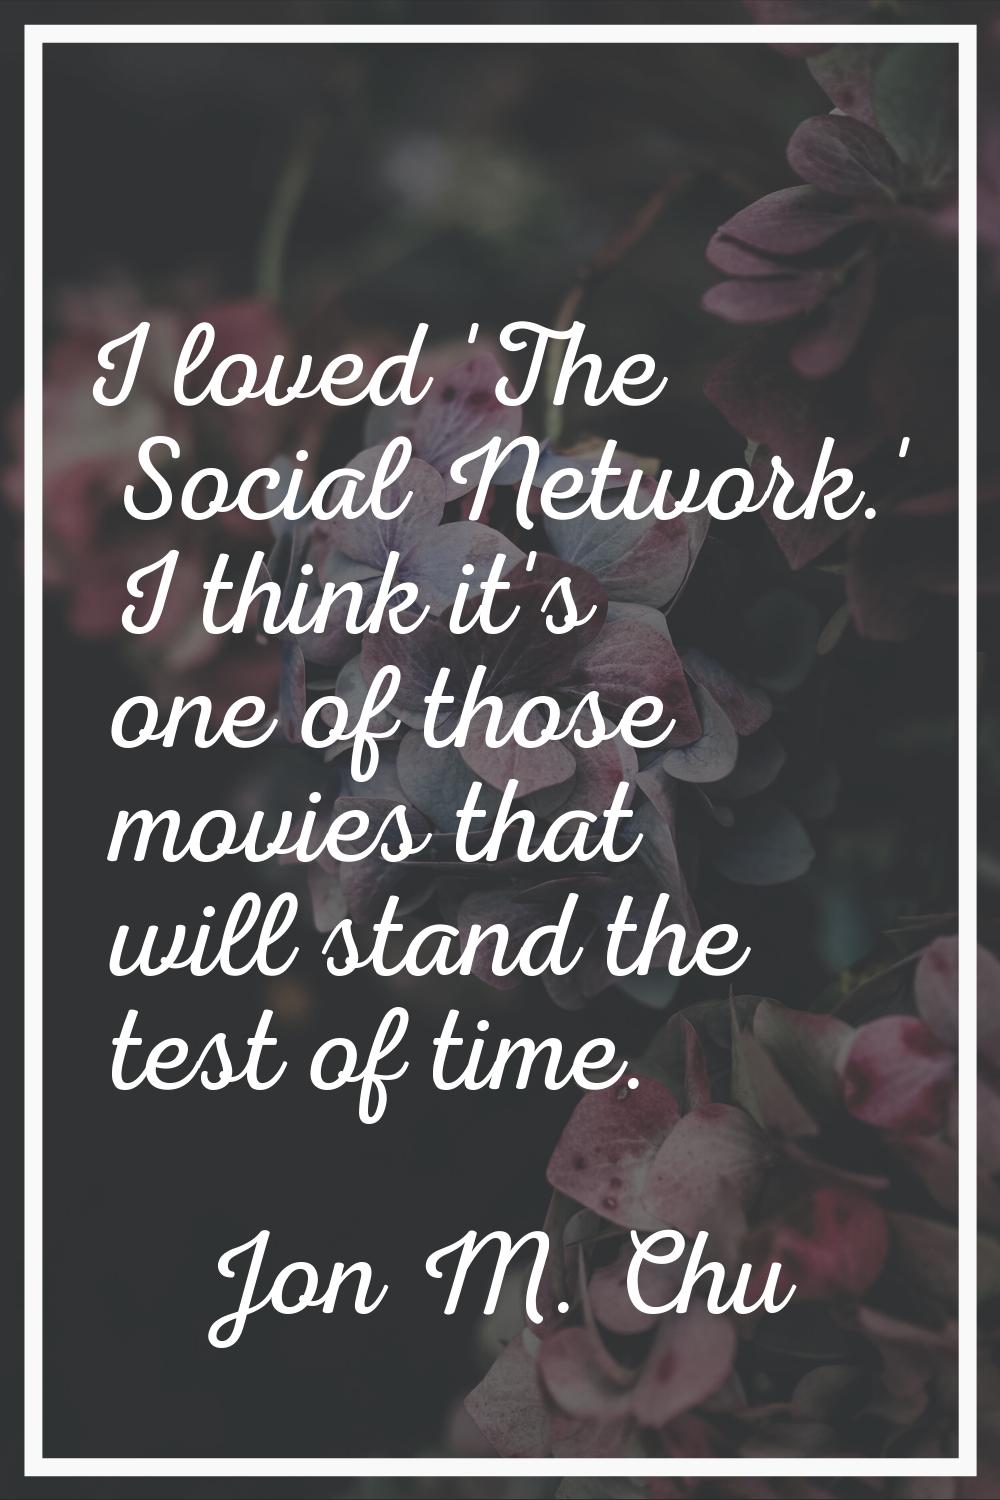 I loved 'The Social Network.' I think it's one of those movies that will stand the test of time.